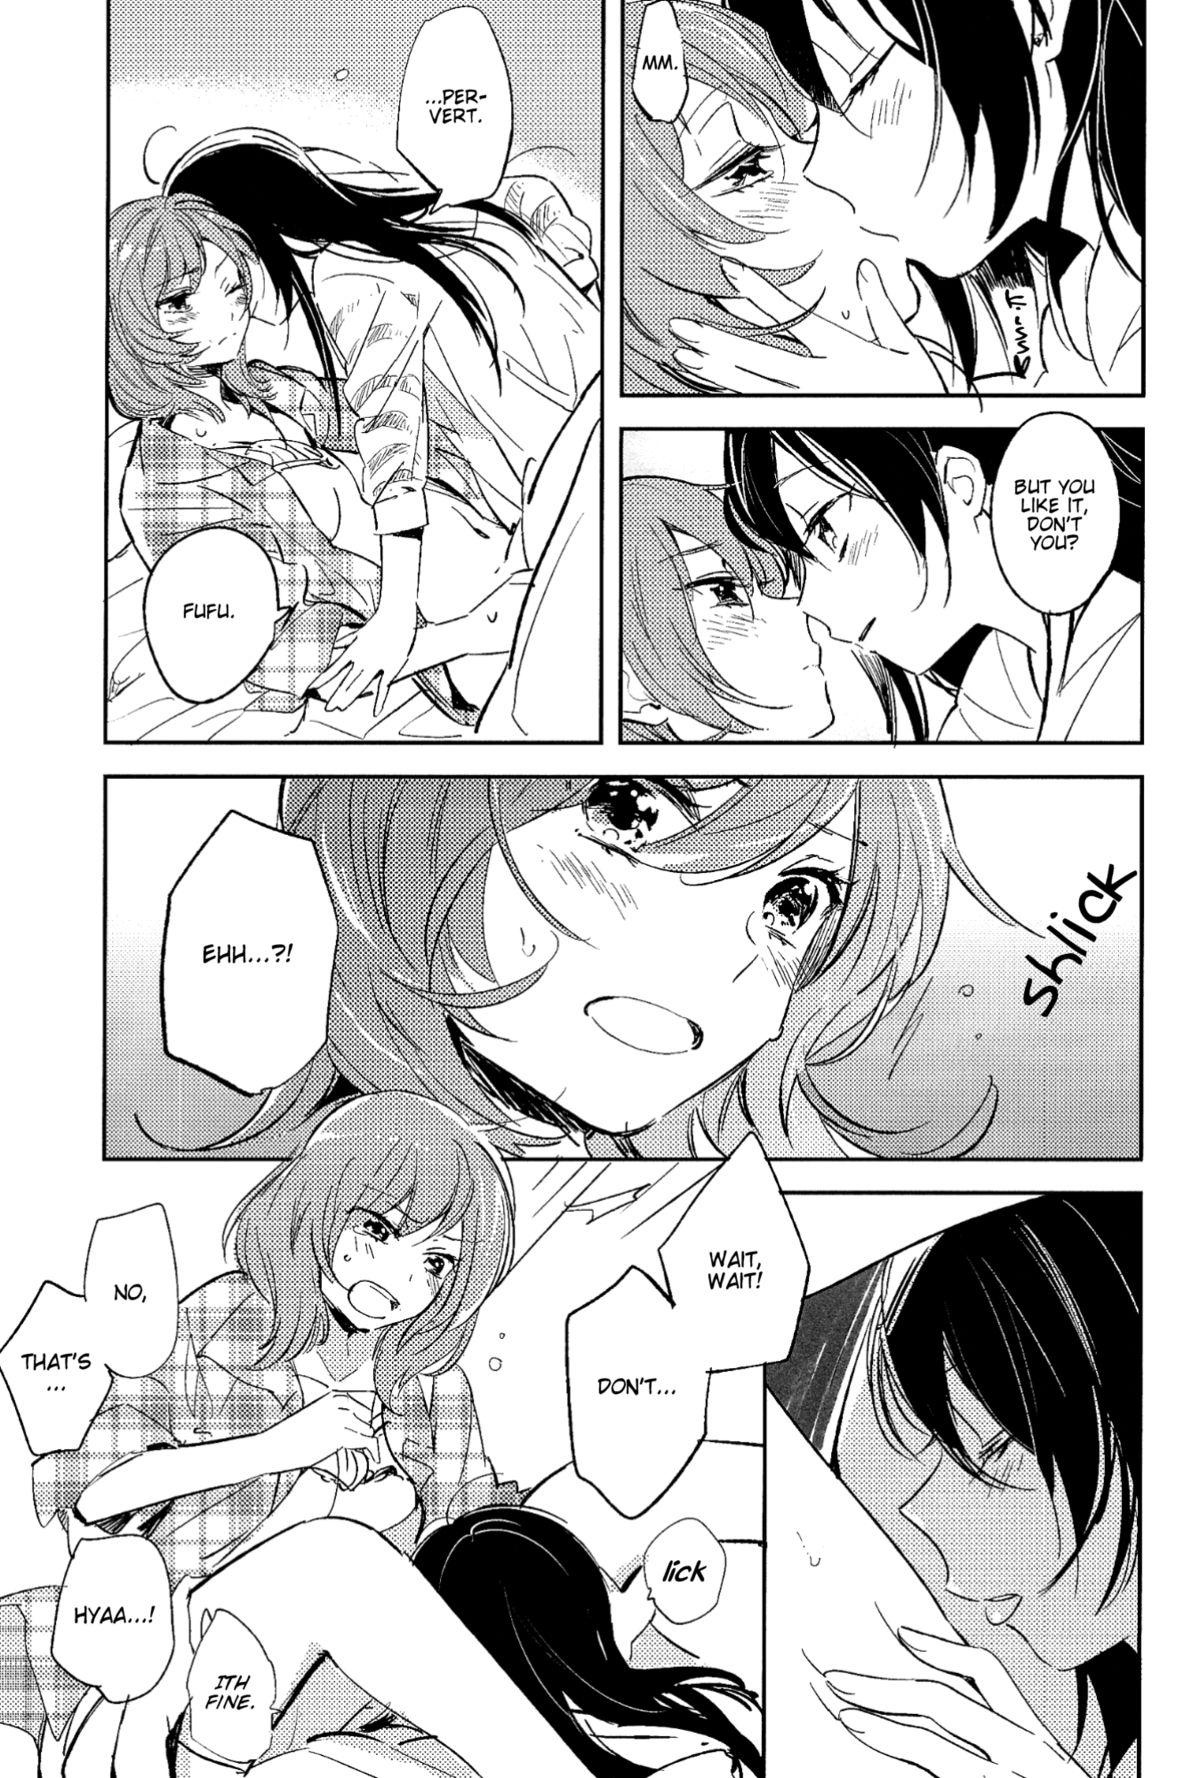 Brazilian Koibito no Jikan | Time for Lovers - Love live Pussysex - Page 11